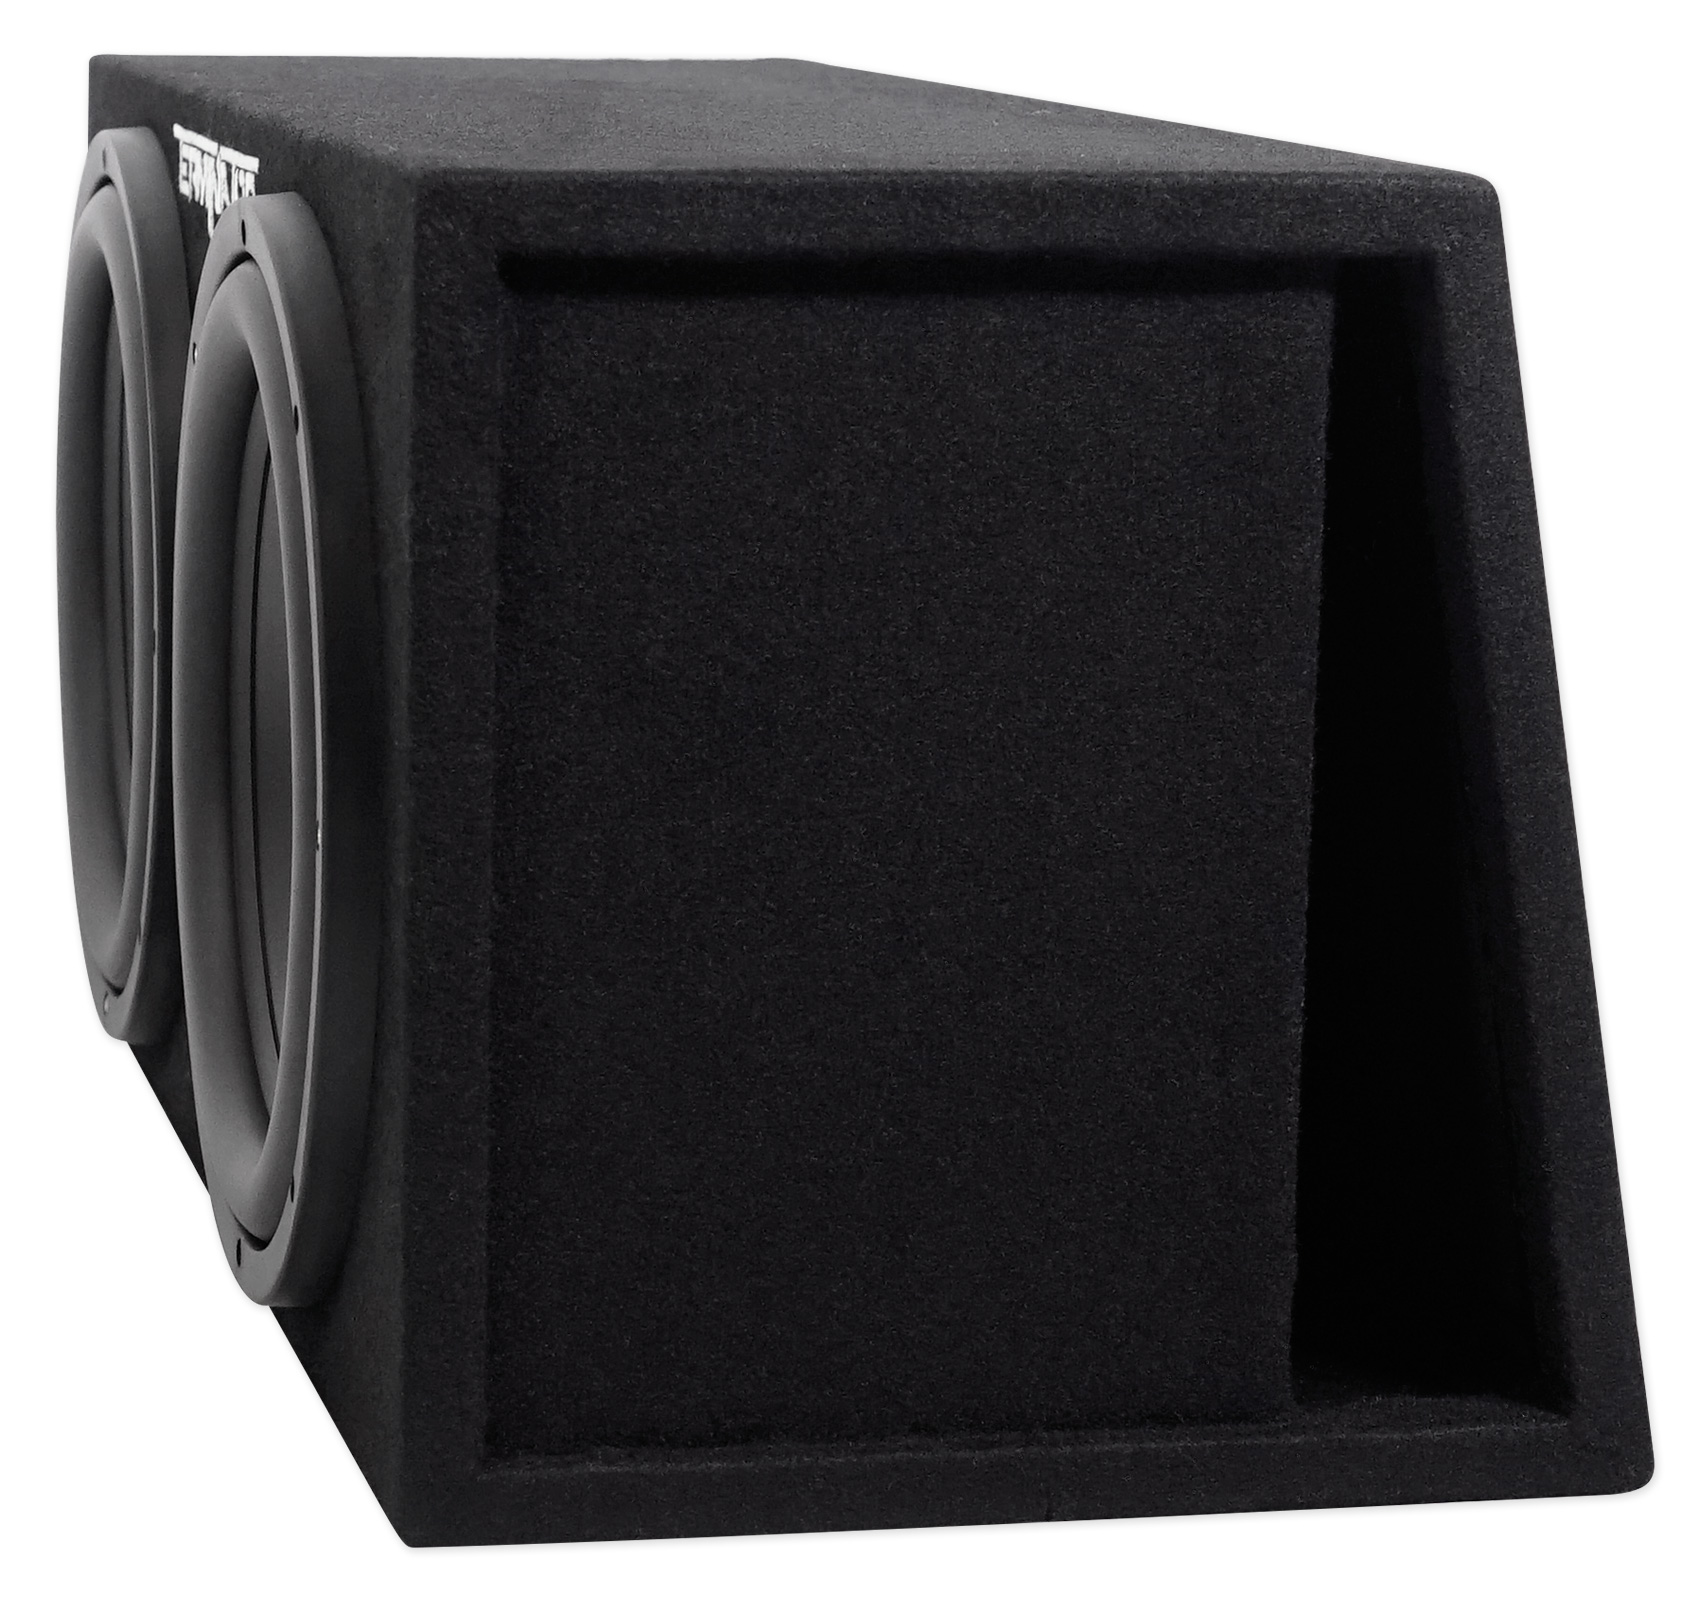 MTX TNP212DV 12in 2000W Dual Loaded Subwoofer Enclosure with Amplifier, New - image 3 of 10